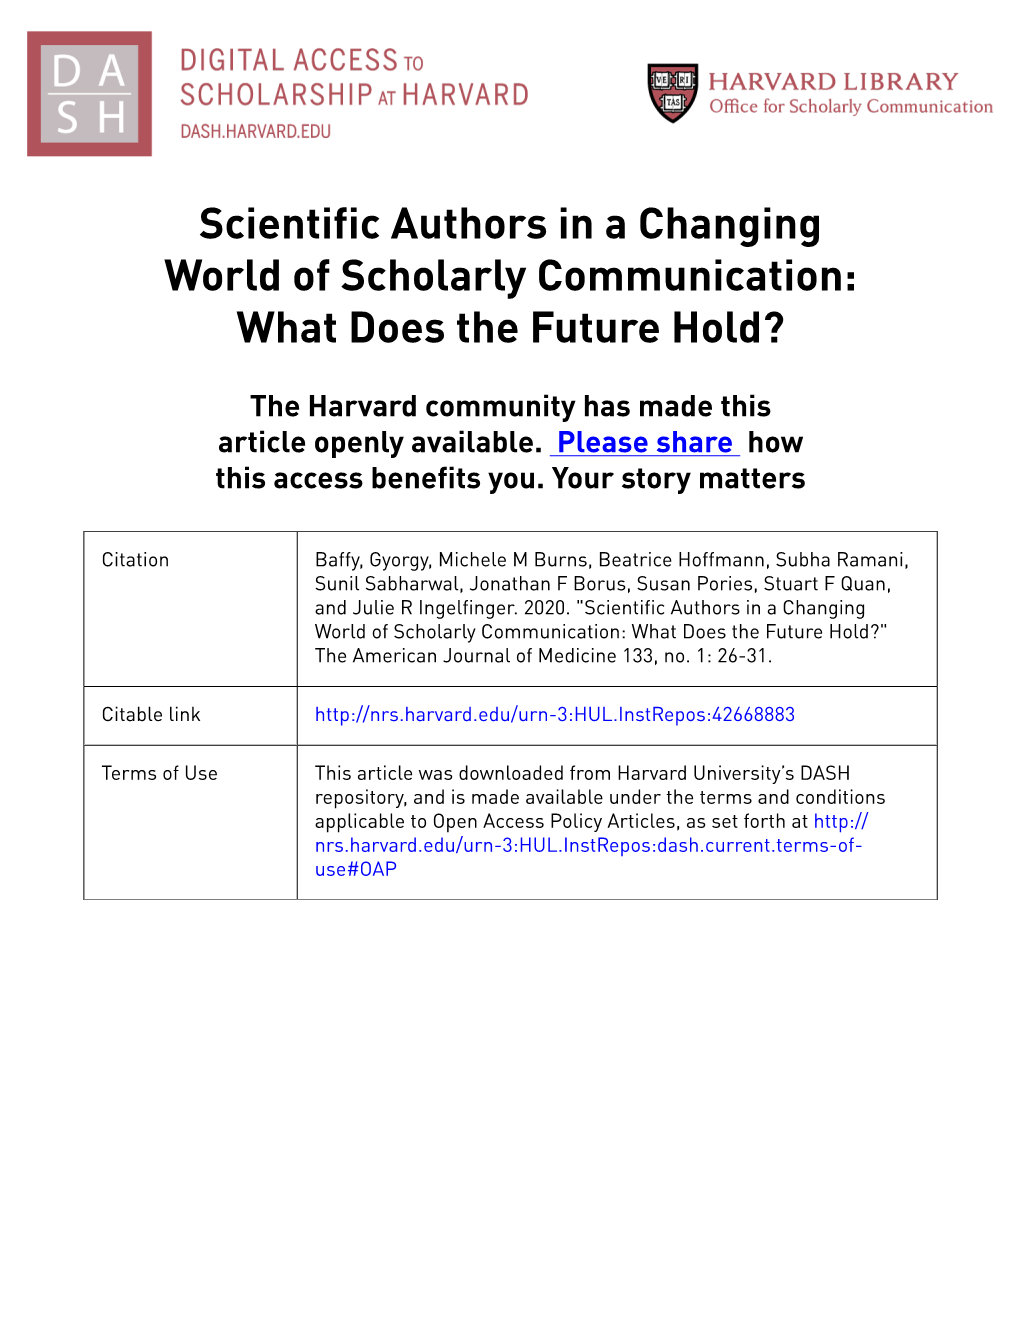 Scientific Authors in a Changing World of Scholarly Communication: What Does the Future Hold?